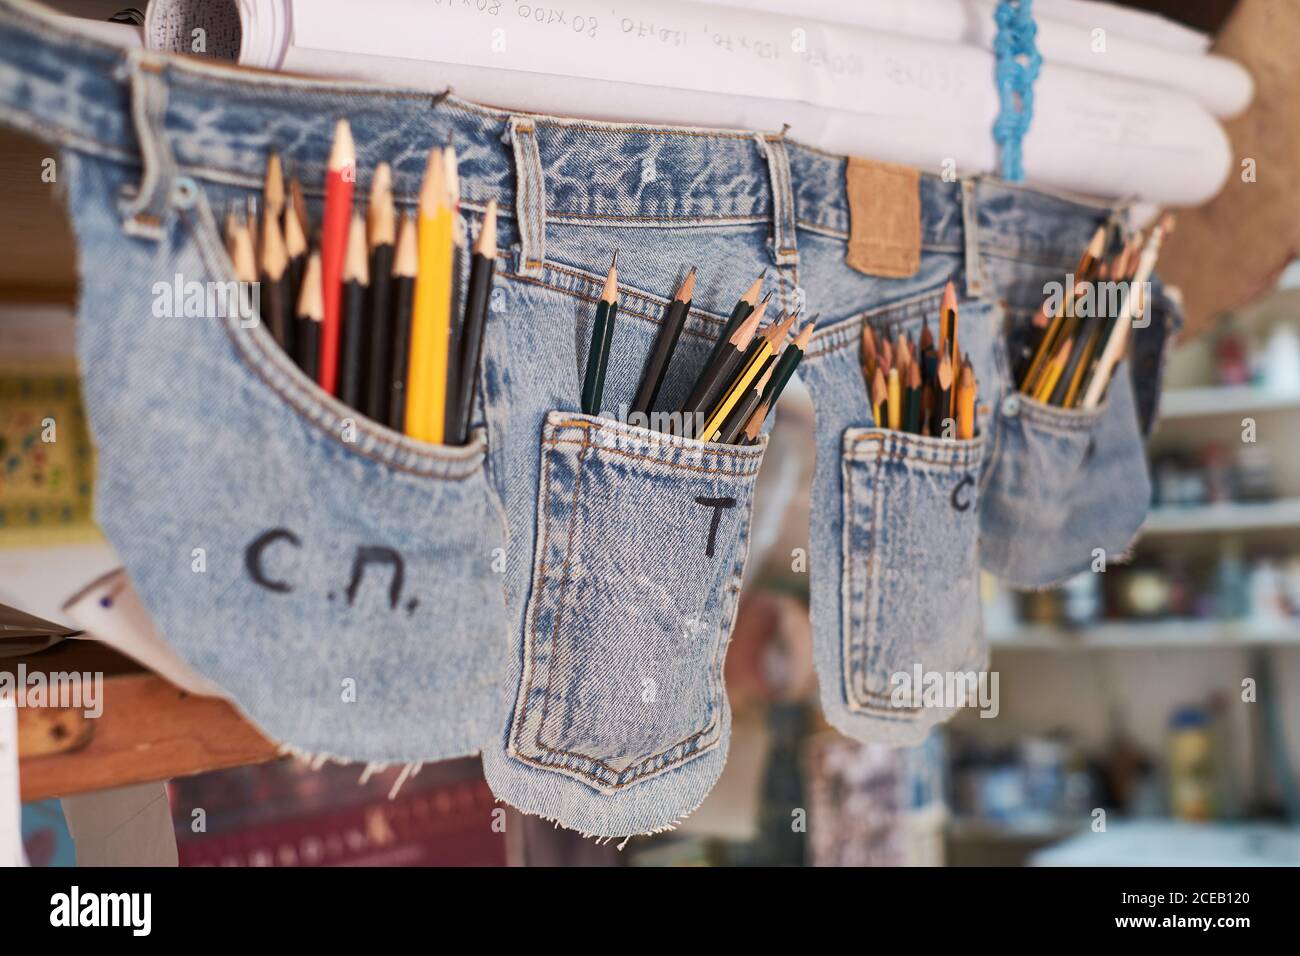 Creative pen case made of jeans pockets full of writing pencils hanging in  room Stock Photo - Alamy